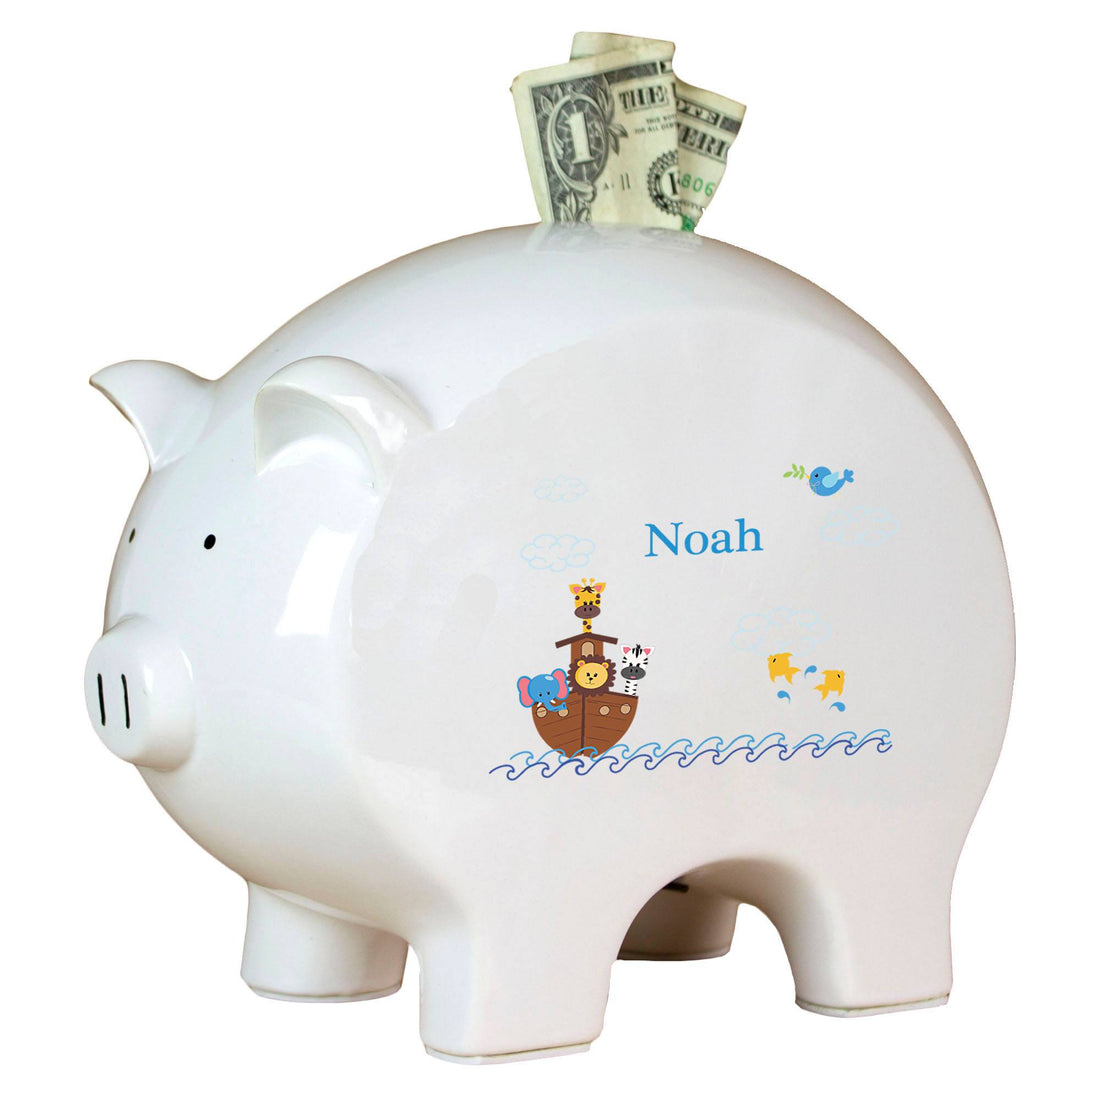 Personalized Piggy Bank with Noahs Ark design